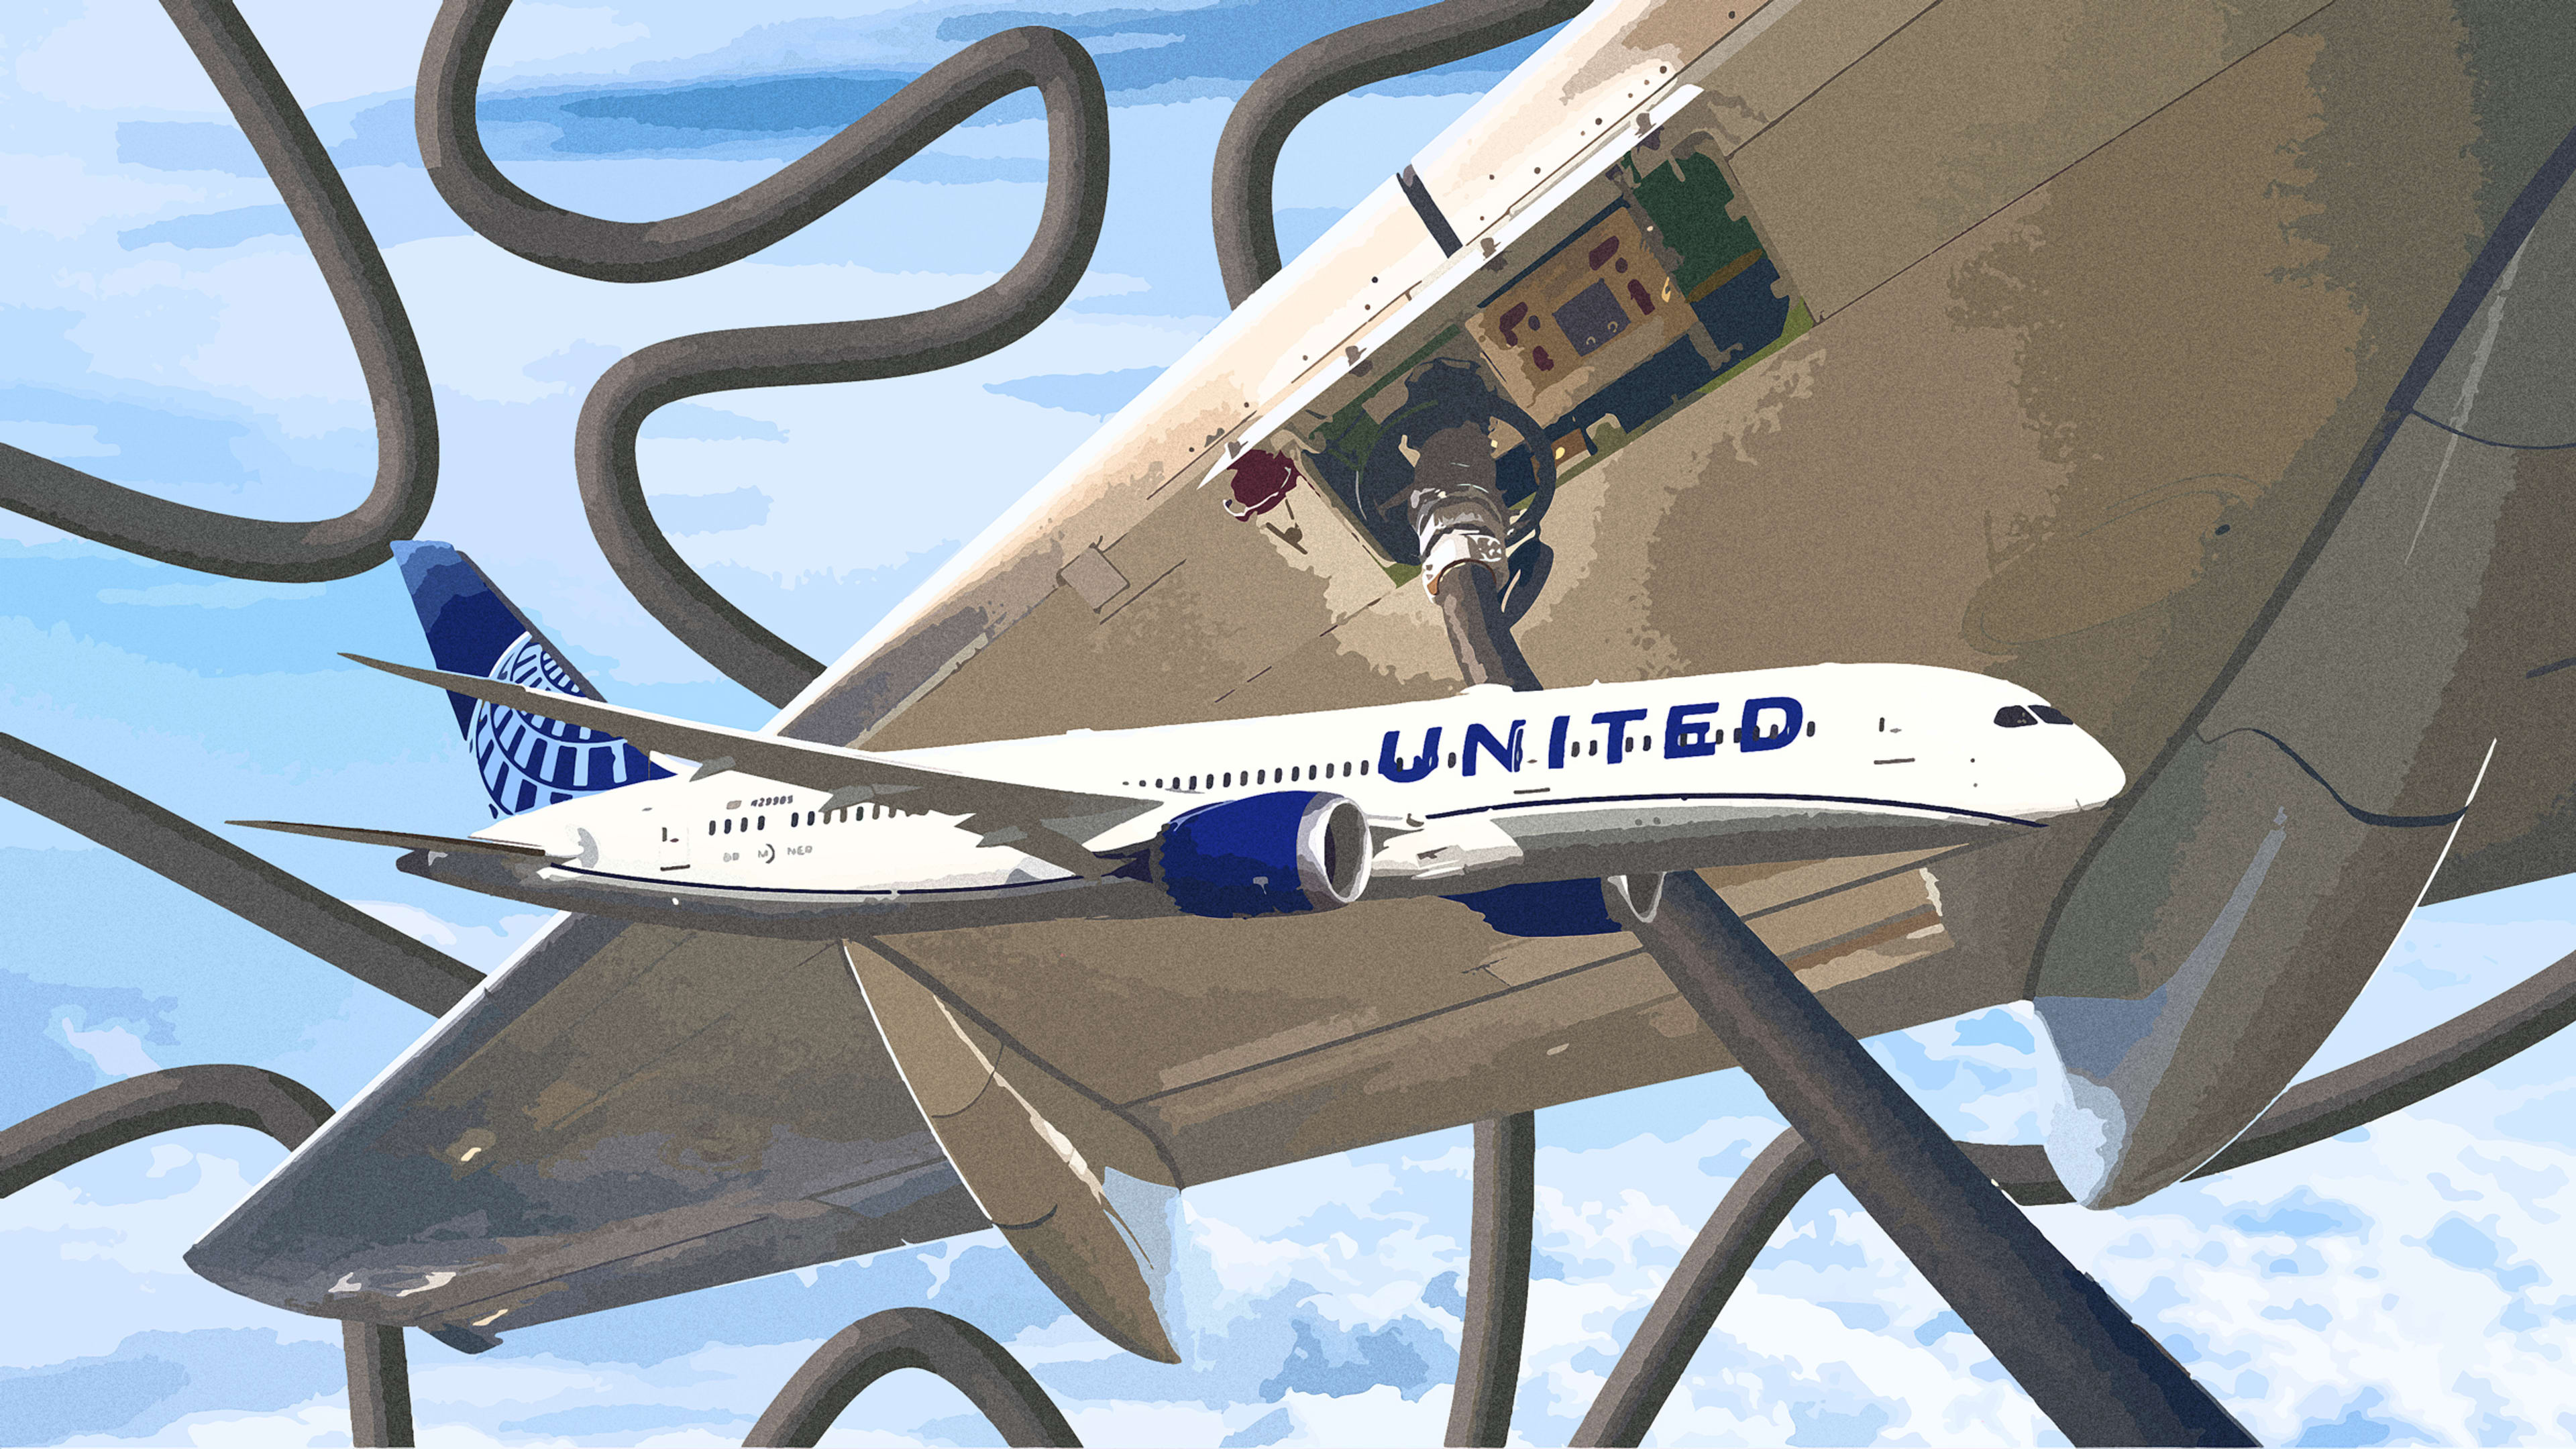 United is the first U.S. airline to purchase sustainable aviation fuel overseas